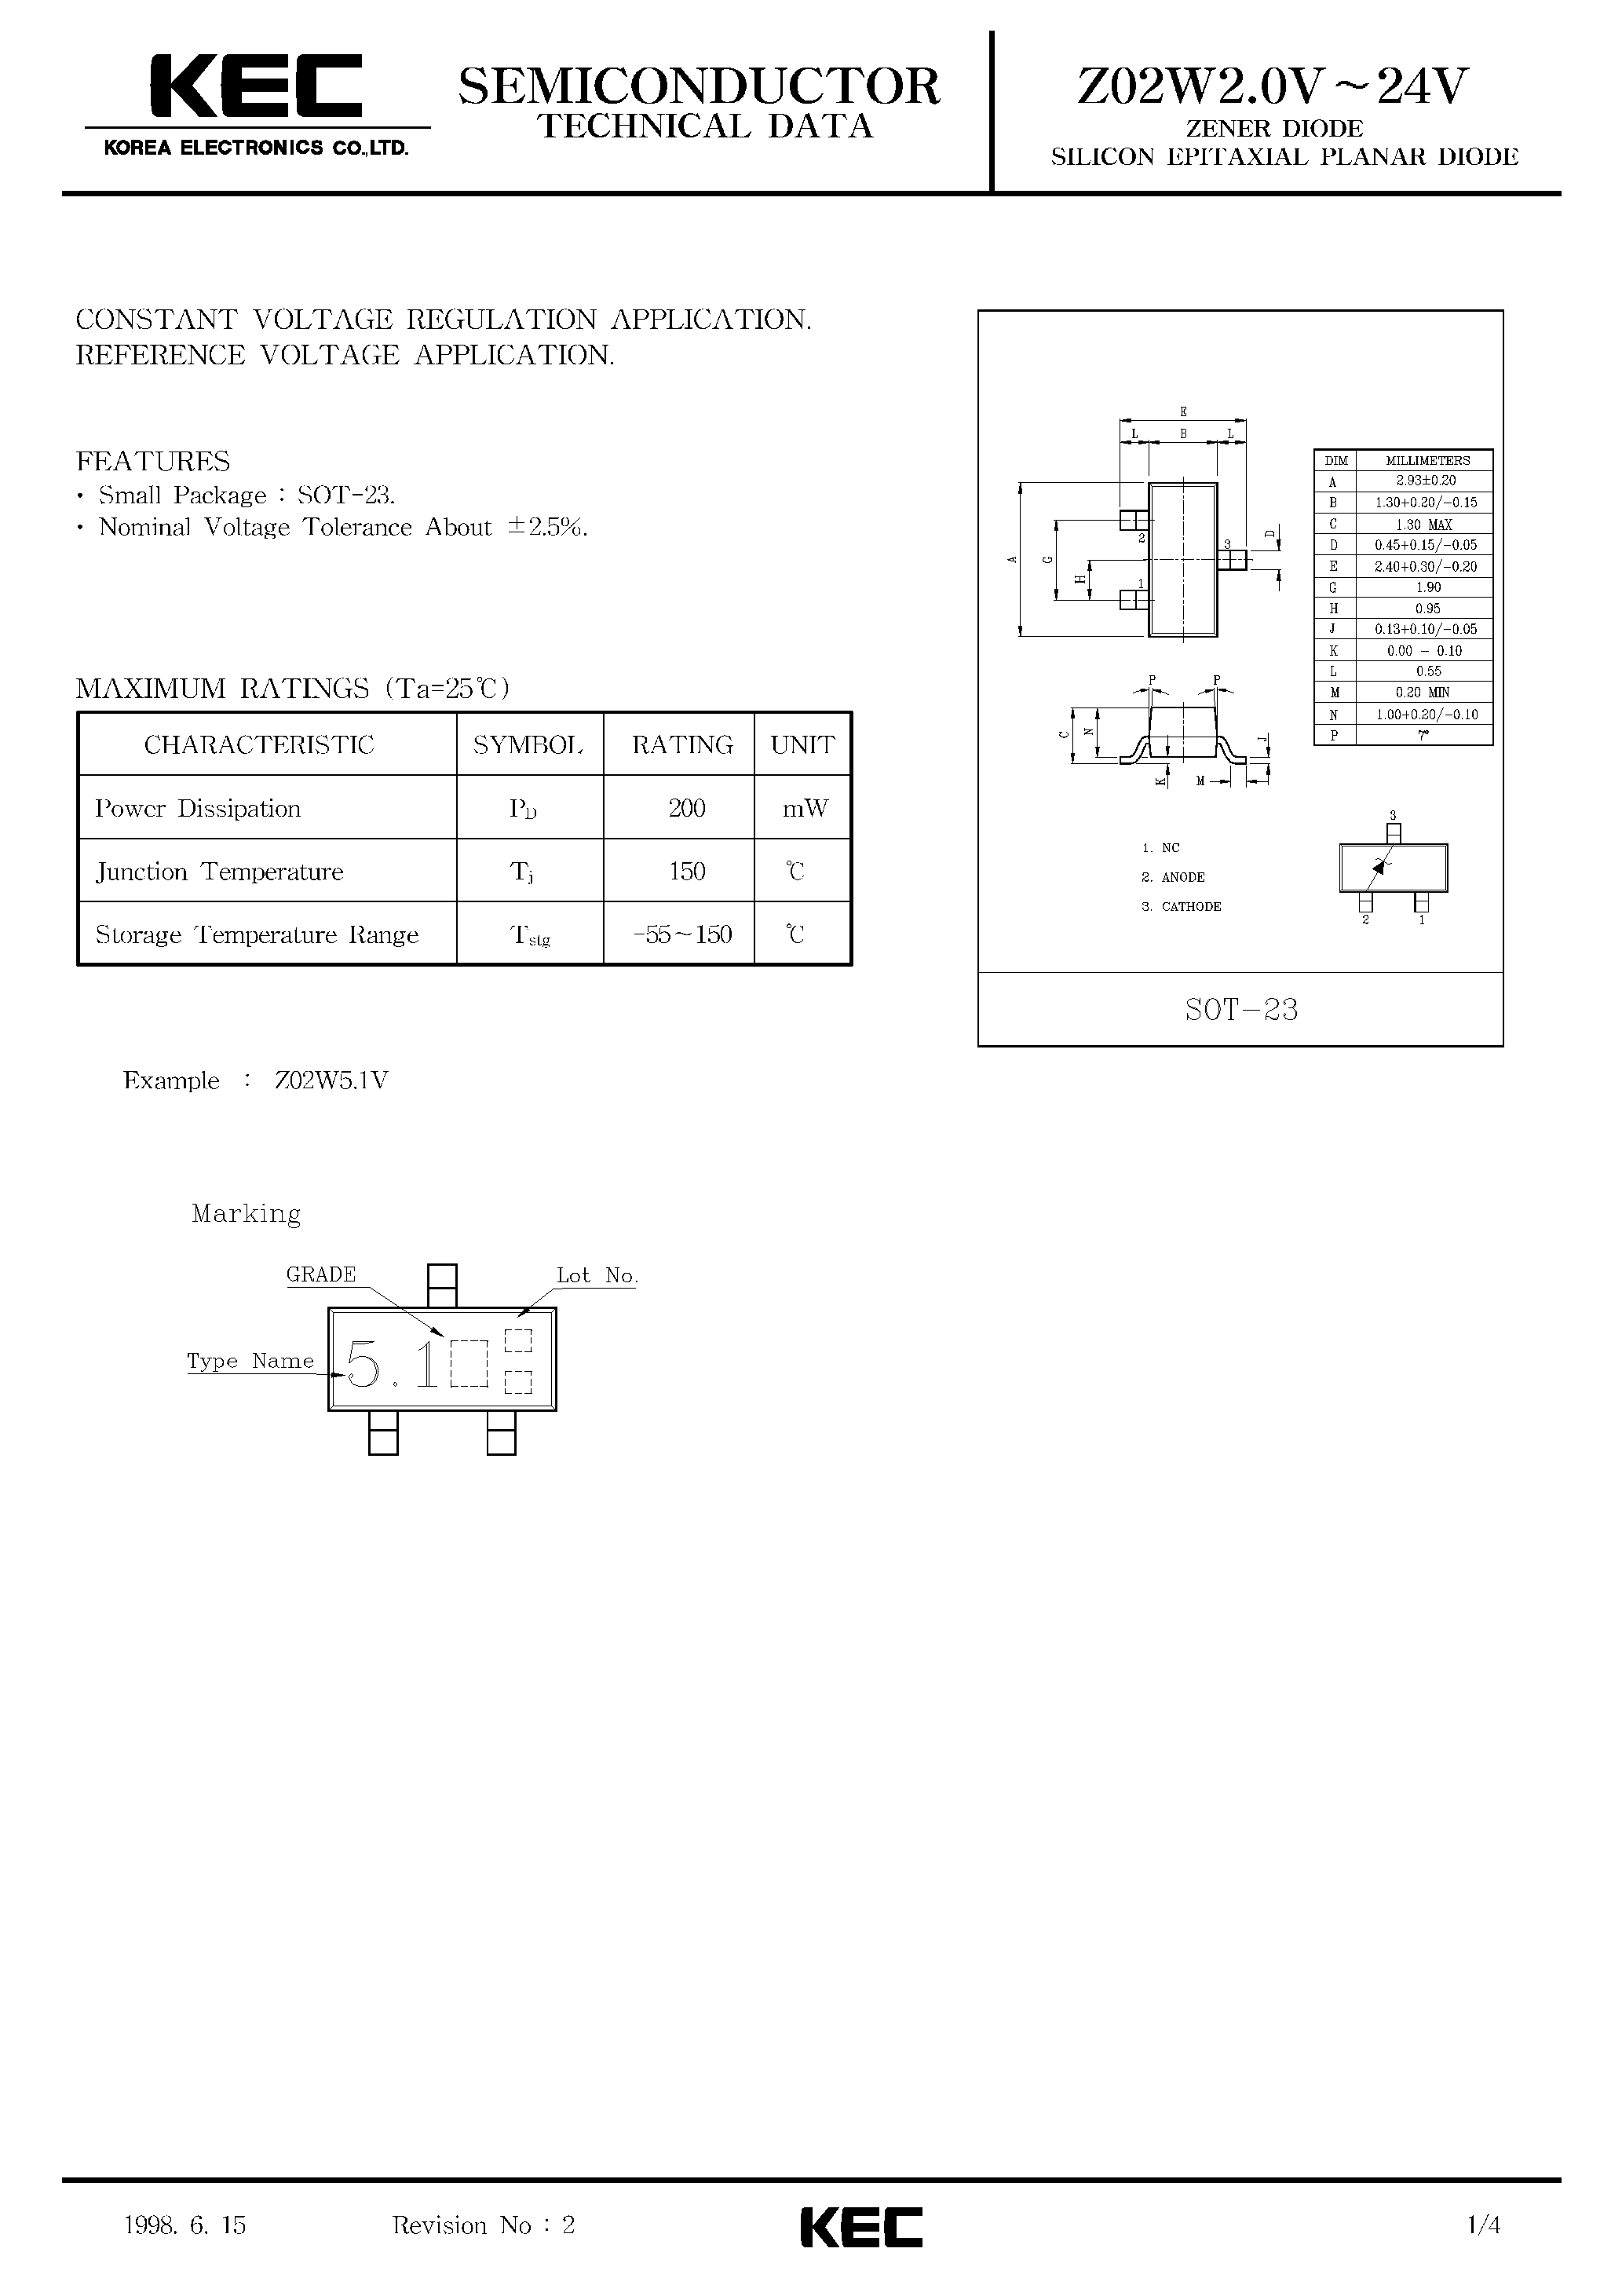 Datasheet Z02W2.4V - ZENER DIODE SILICON EPITAXIAL PLANAR DIODE page 1